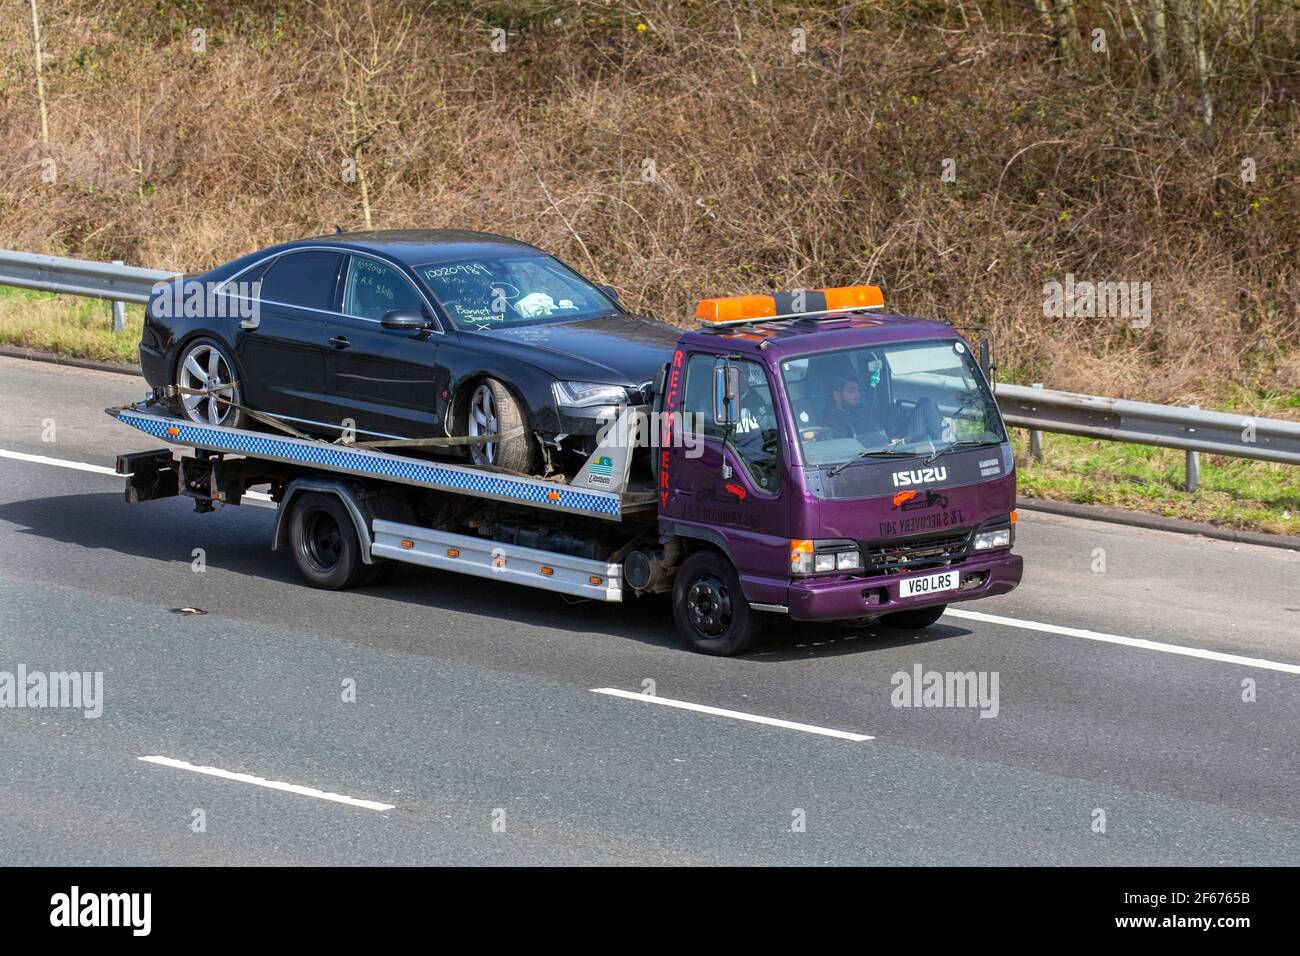 1999 90s nineties Isuzu Npr 65 P 3856cc diesel HCV towing damaged car with deployed airbag & bonnet jammed; Road accident car recovery trailer; 24 hr breakdown commercial breakdown service; Travelling on the M61 motorway, UK Stock Photo